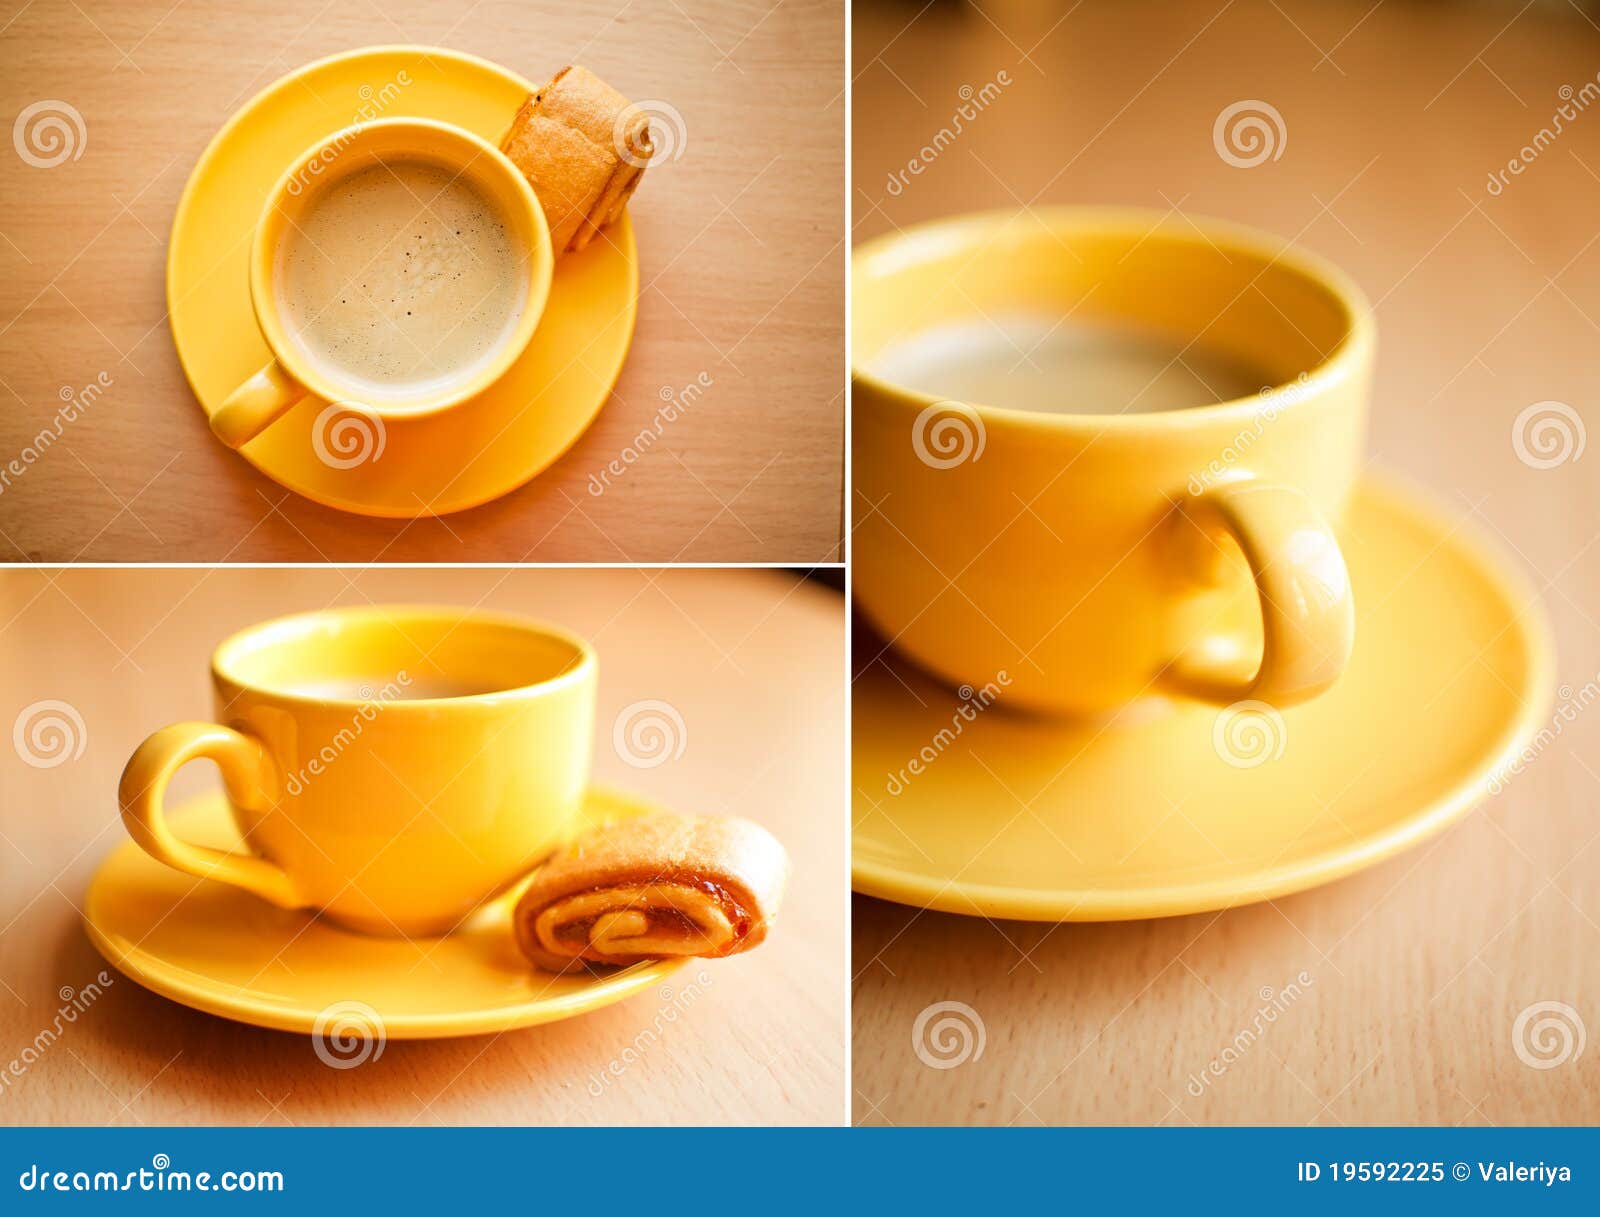 Coffee In Yellow Cup Royalty Free Stock Photo - Image: 19592225